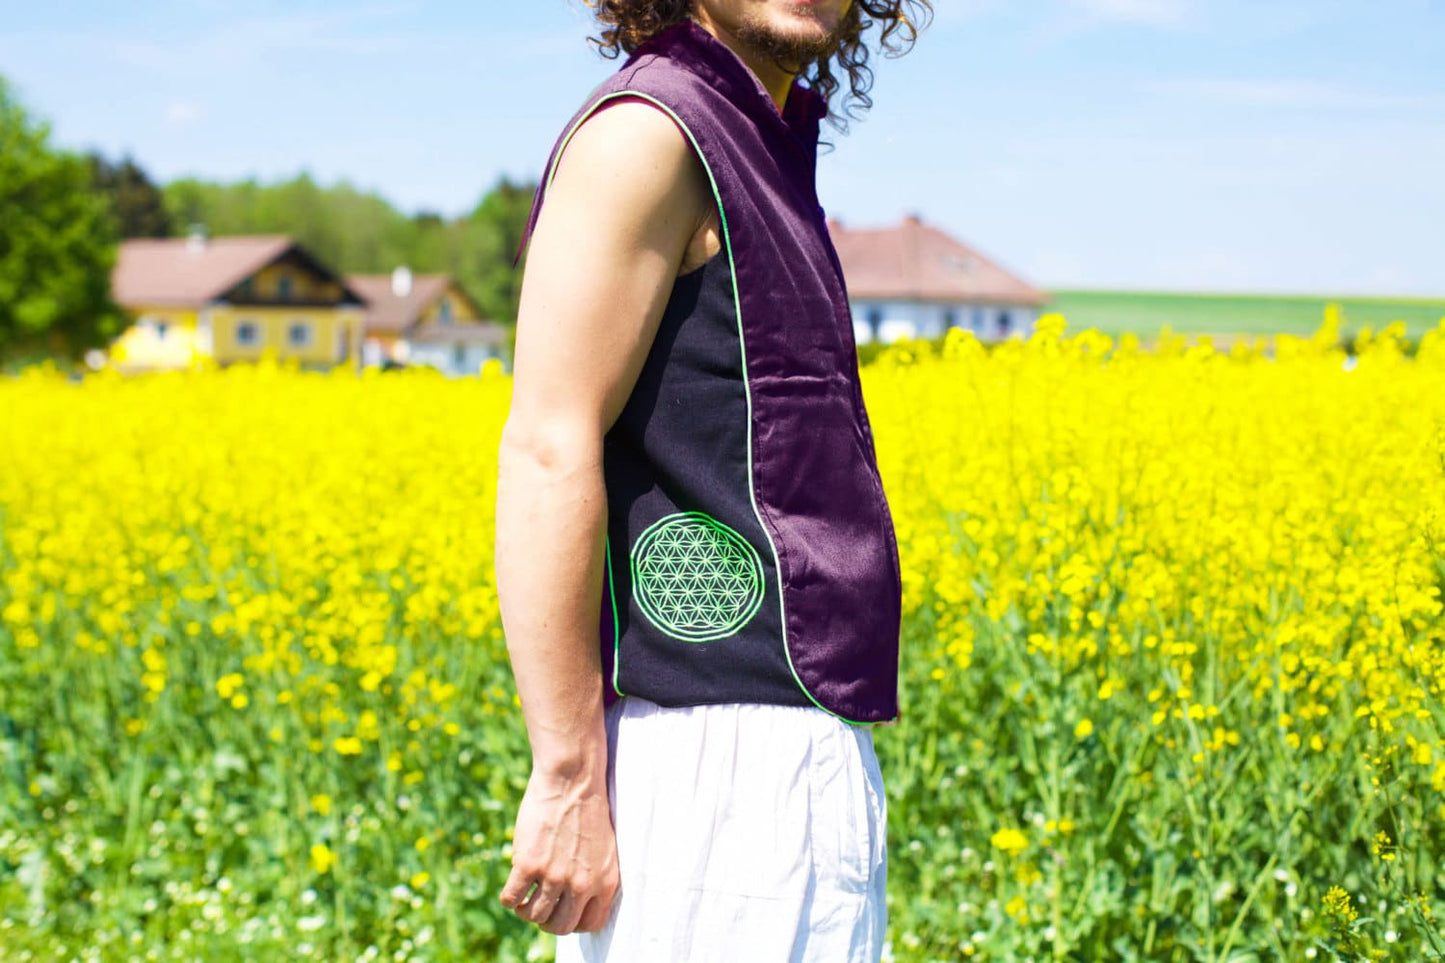 galactic federation crop circle - Design your jacket in any colours -handmade in your size blacklight active 1 zip lock inside pocket